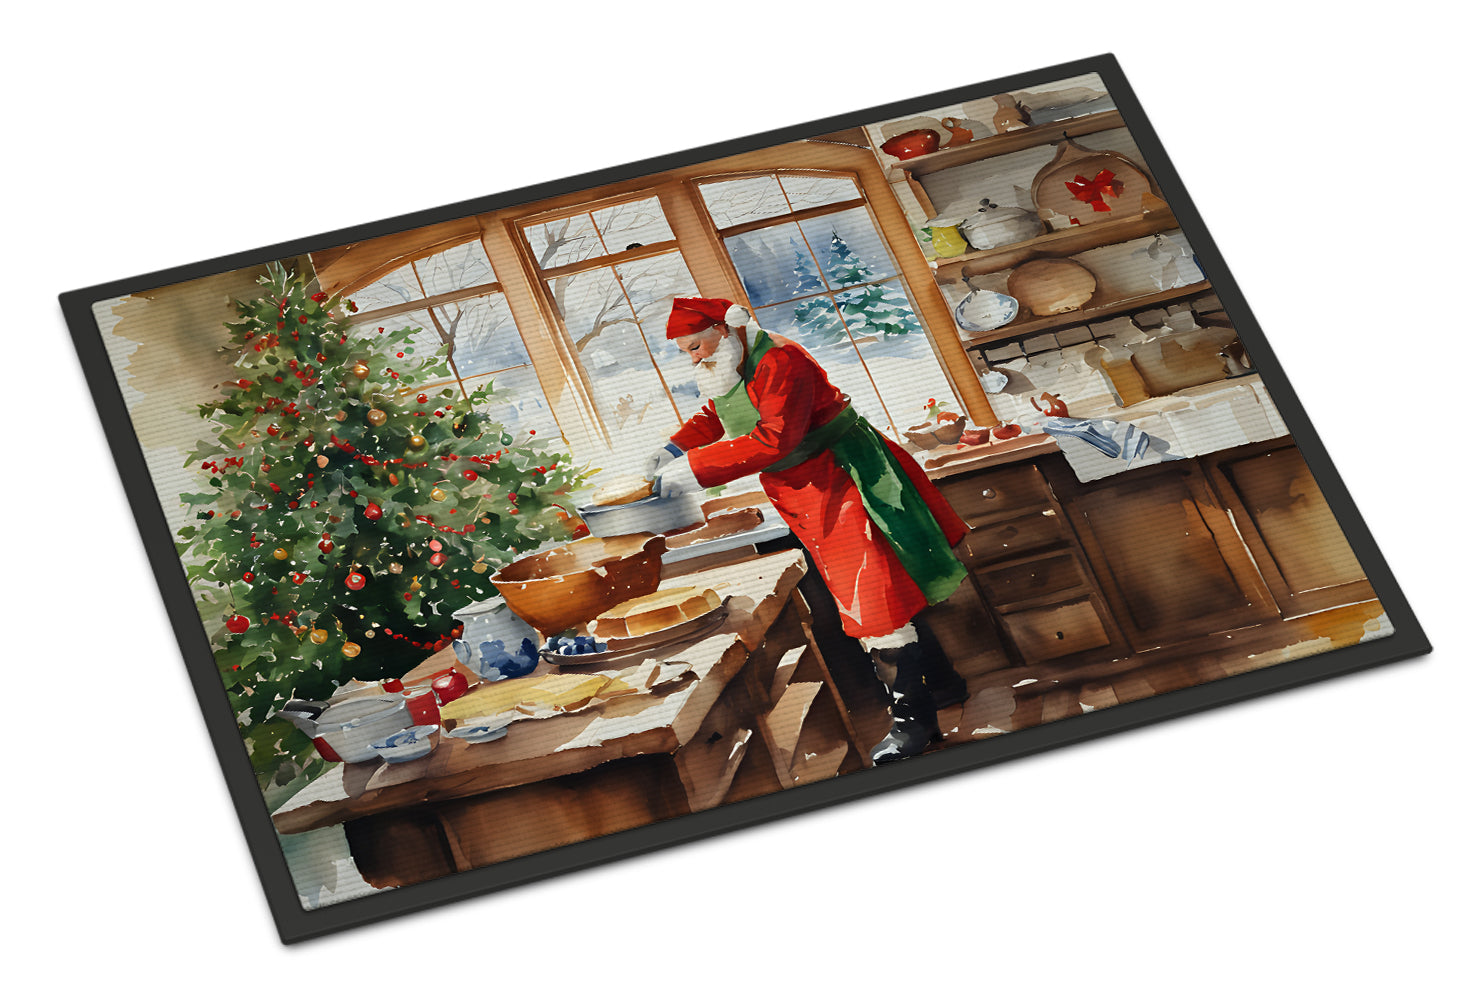 Buy this Cookies with Santa Claus Weihnachtsmann Doormat